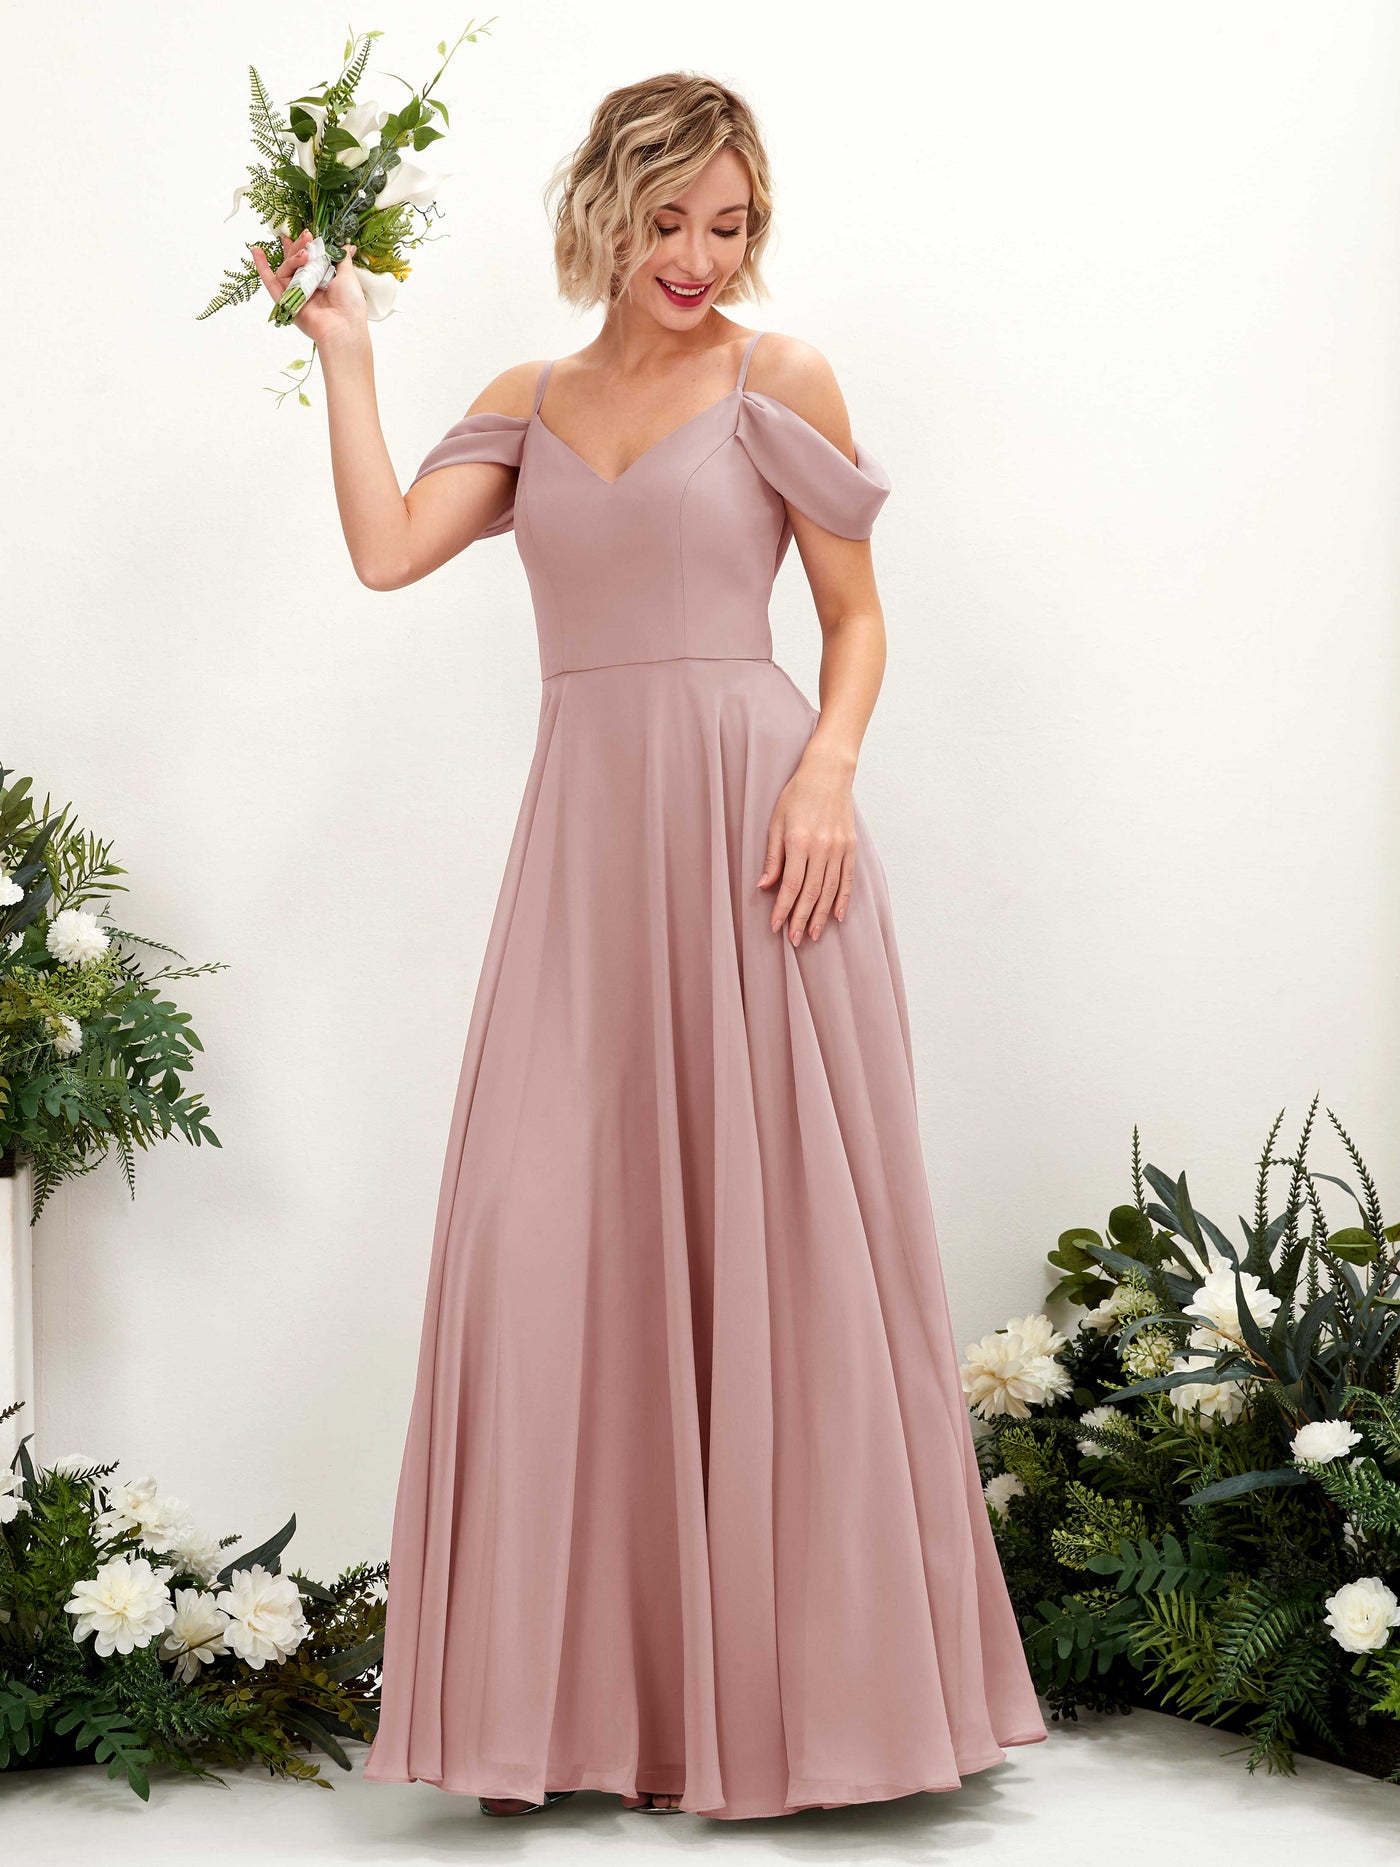 Dusty Rose Bridesmaid Dresses Bridesmaid Dress A-line Chiffon Off Shoulder Full Length Sleeveless Wedding Party Dress (81224909)#color_dusty-rose